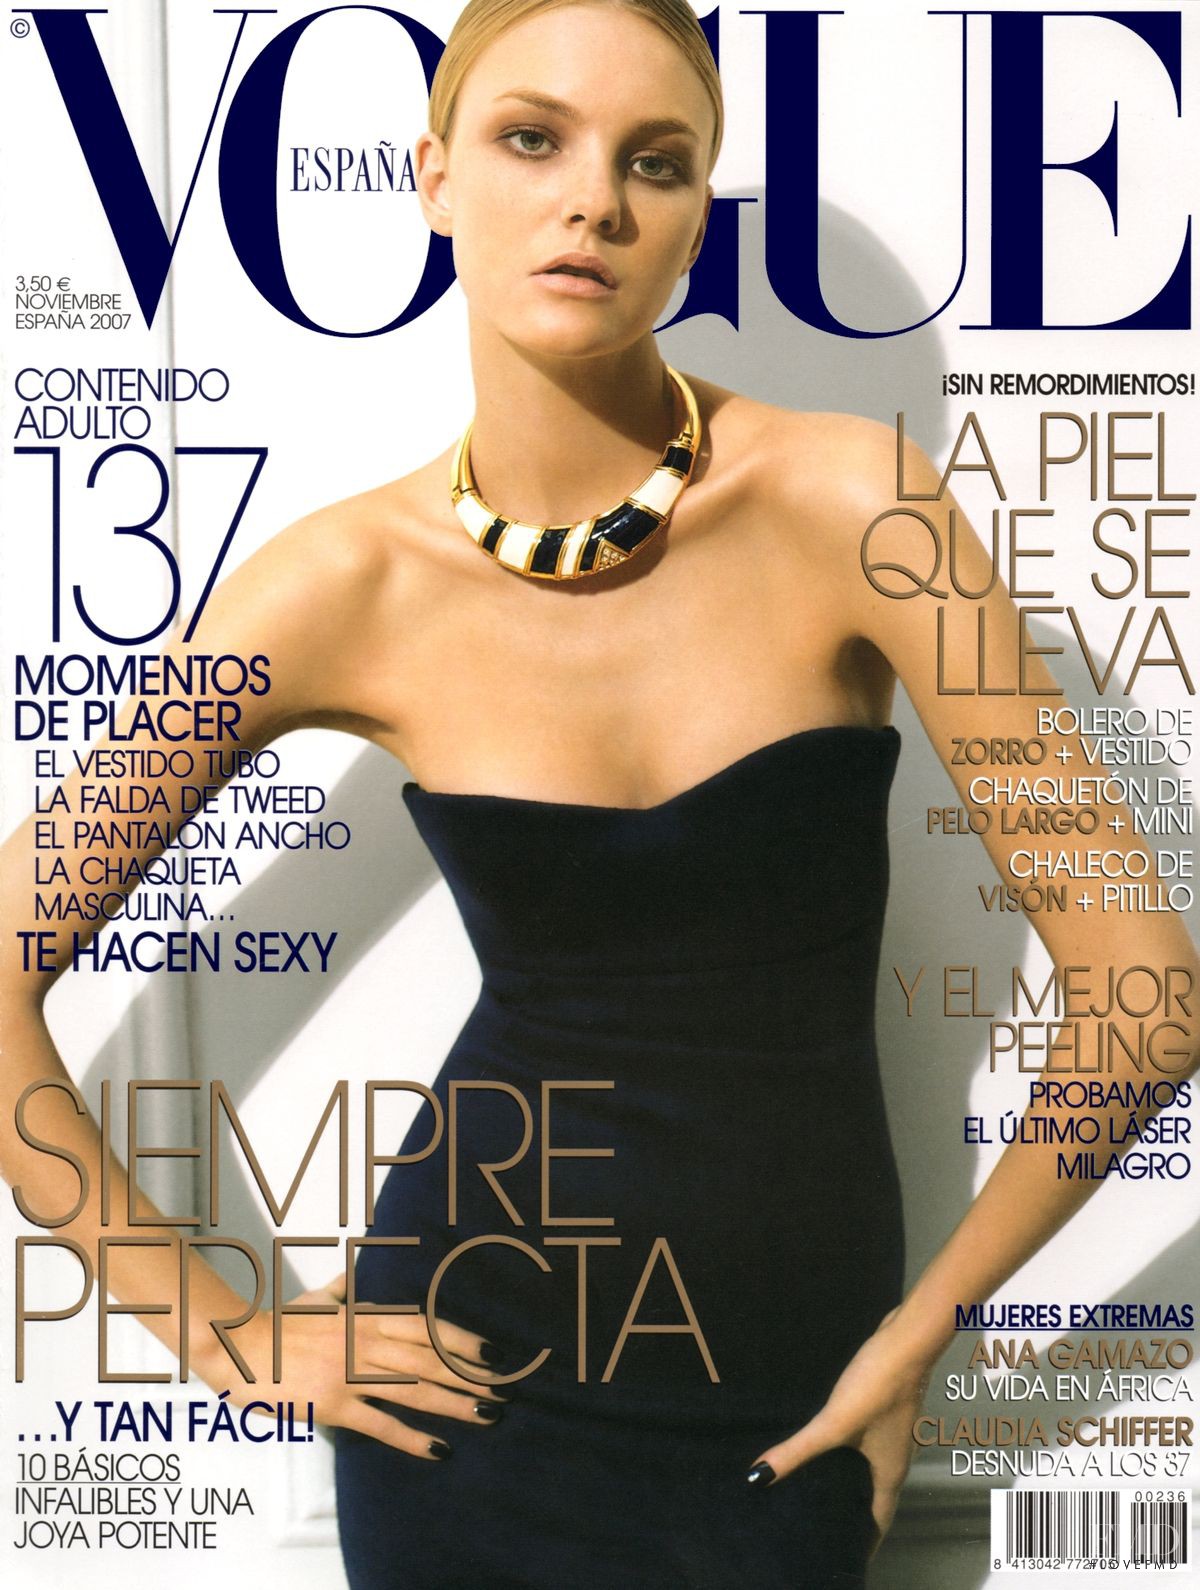 Cover of Vogue Spain with Caroline Trentini, November 2007 (ID:3494 ...